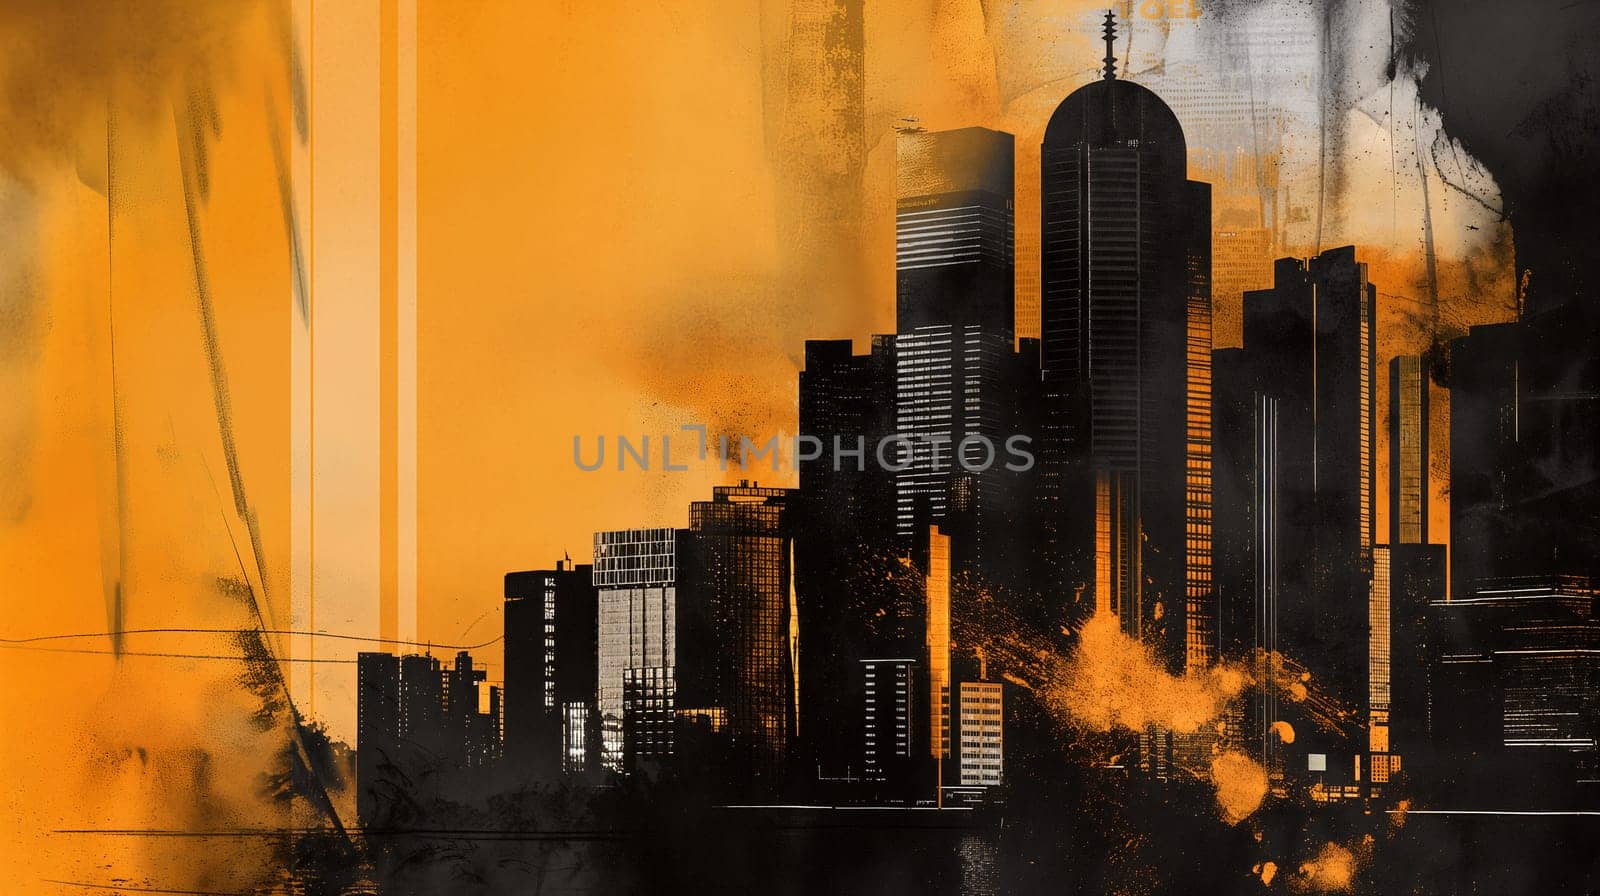 An abstract depiction of a city skyline during sunset, characterized by bold orange and black hues. The silhouettes of tall buildings create a dramatic urban scene - Generative AI